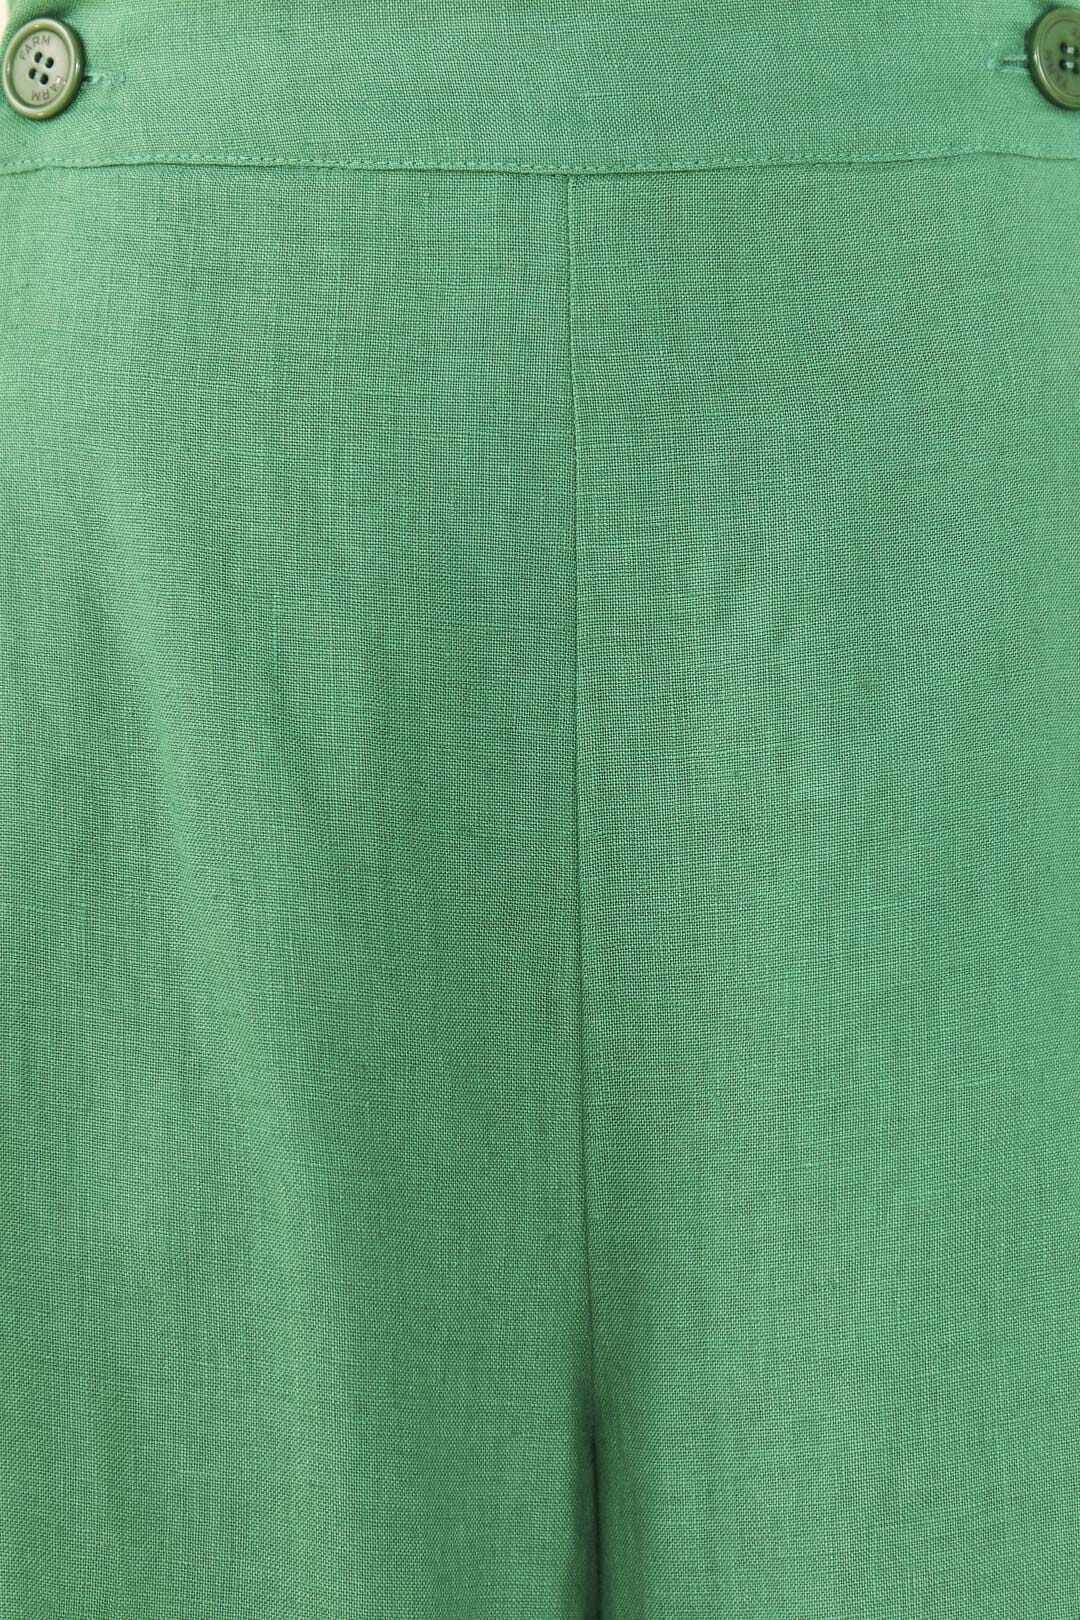 Embroided Green Pants